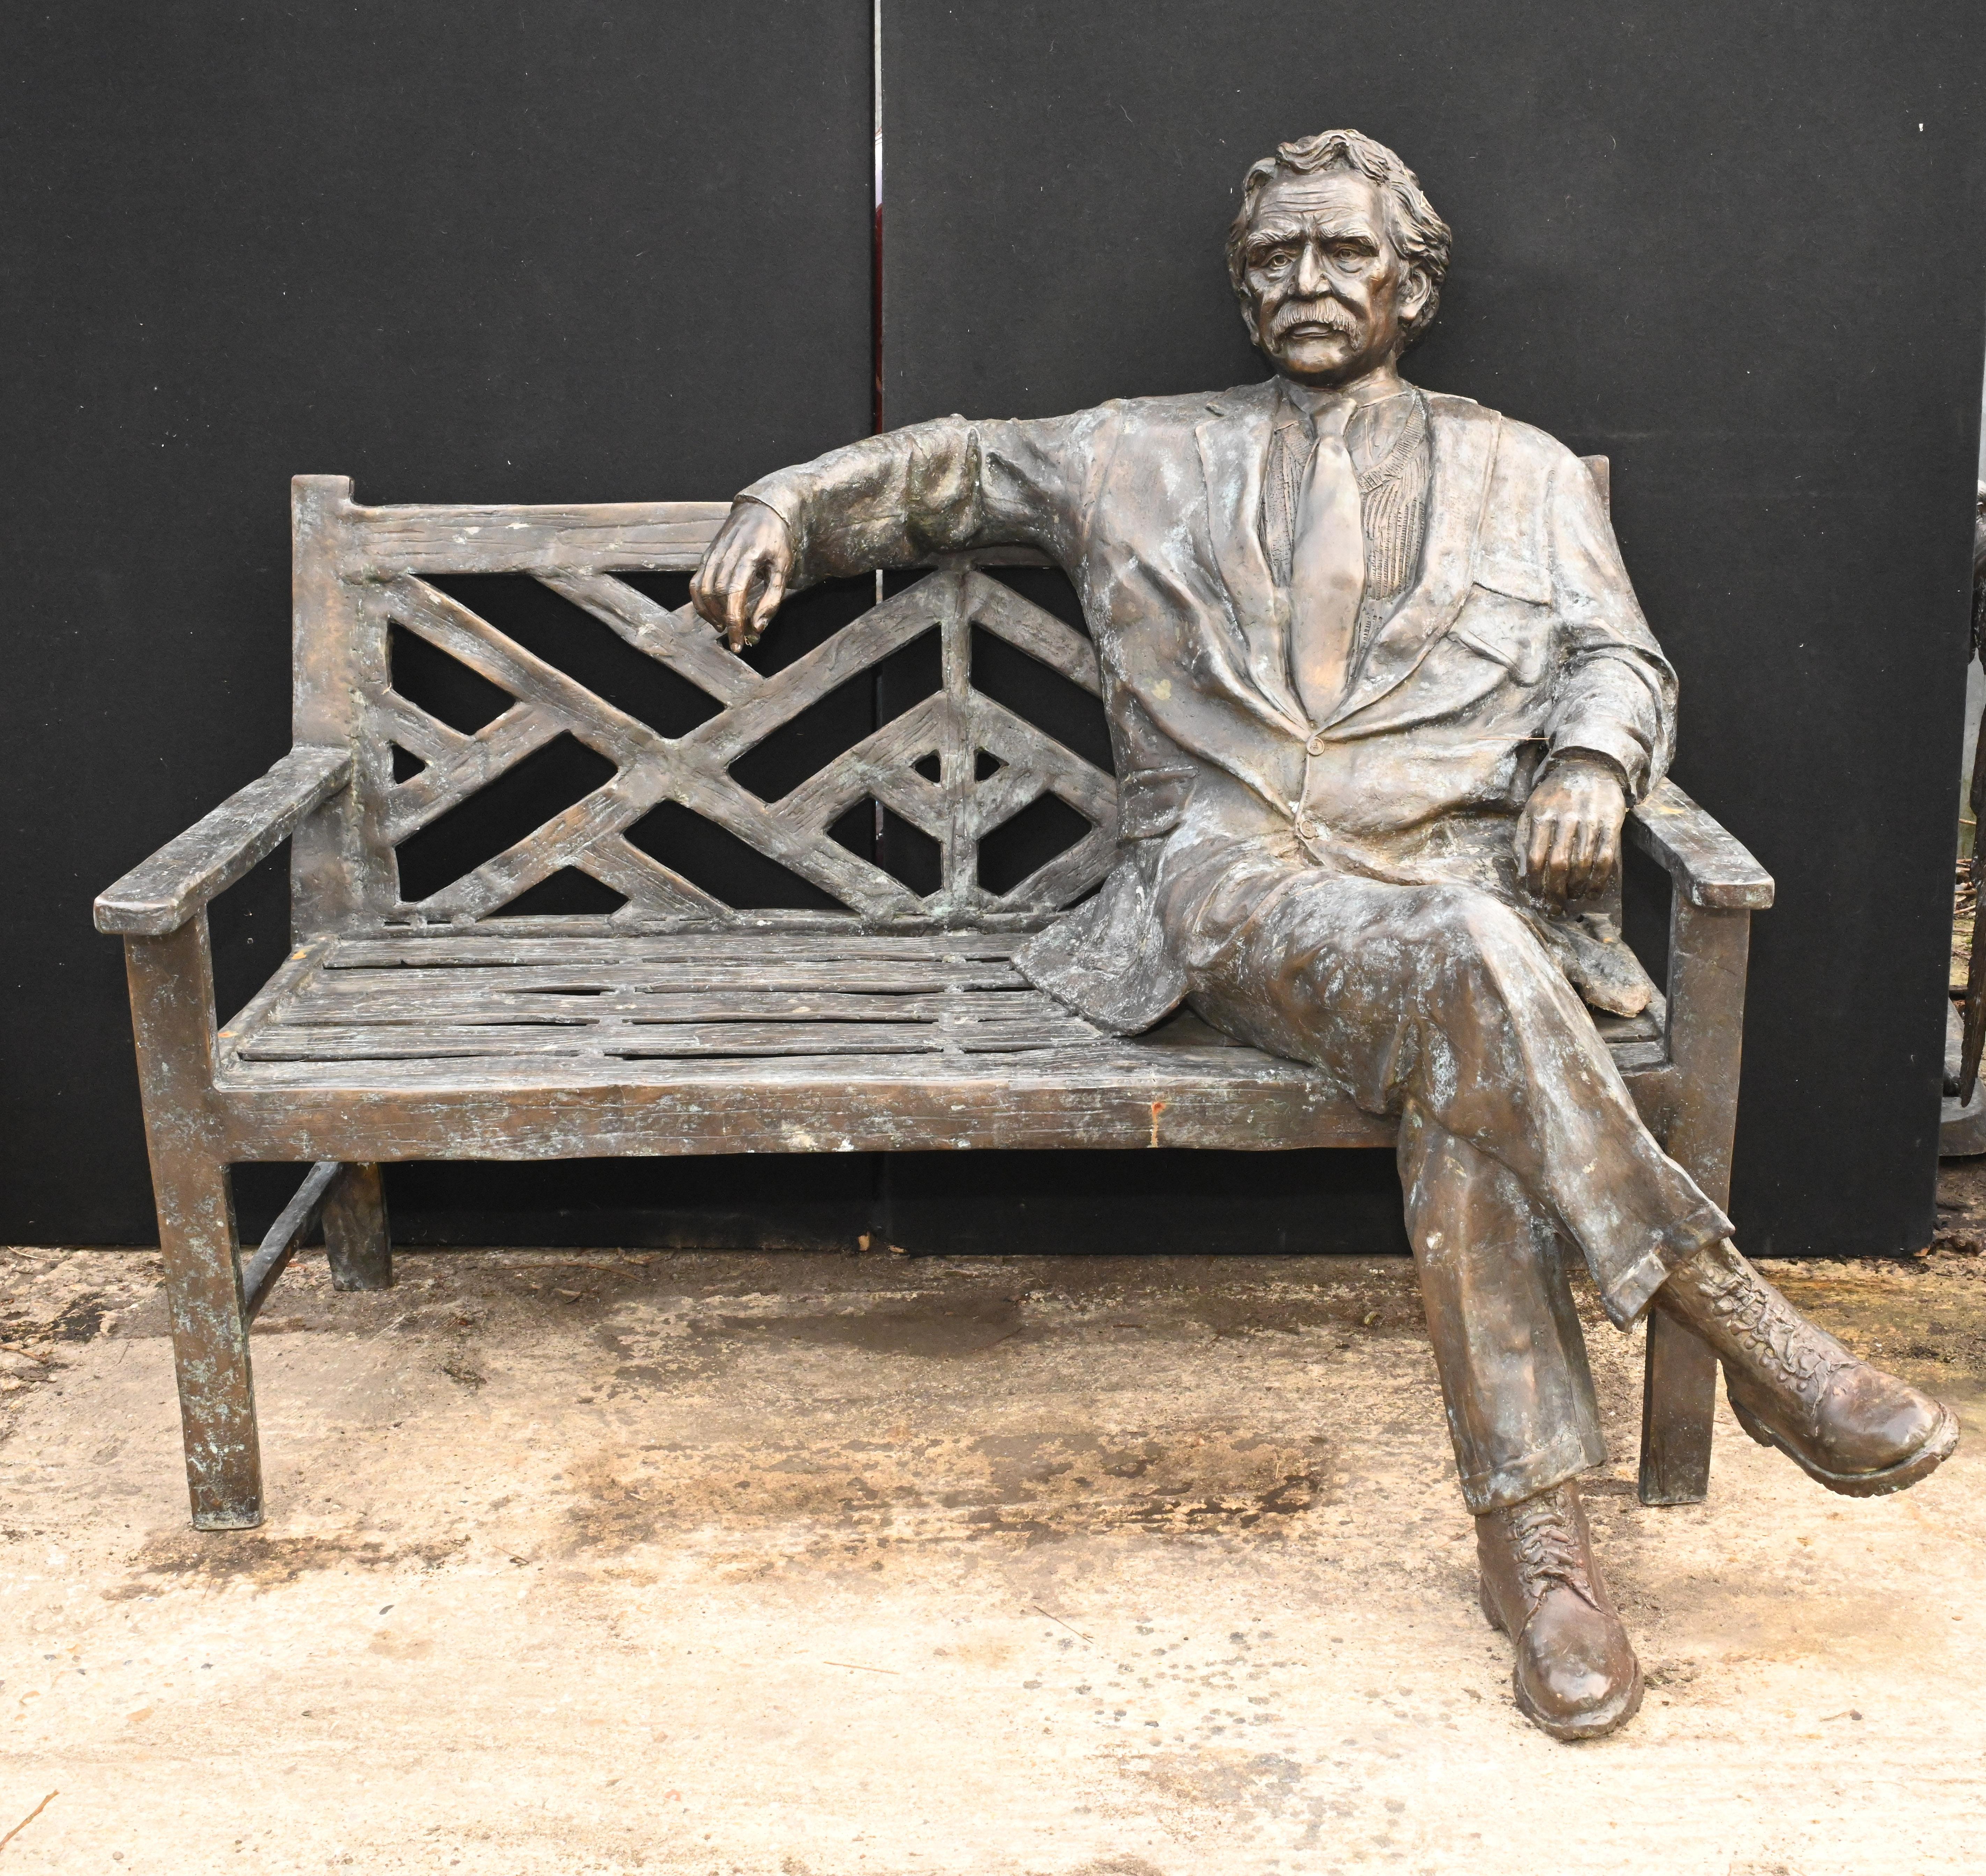 Aggh, you know when it's one of those days and you want to sit down and chat with the worlds most famous theoretical physicist about the theory of relativity?
Well now you can with this gorgeous garden bench in bronze with a lifesize statue of